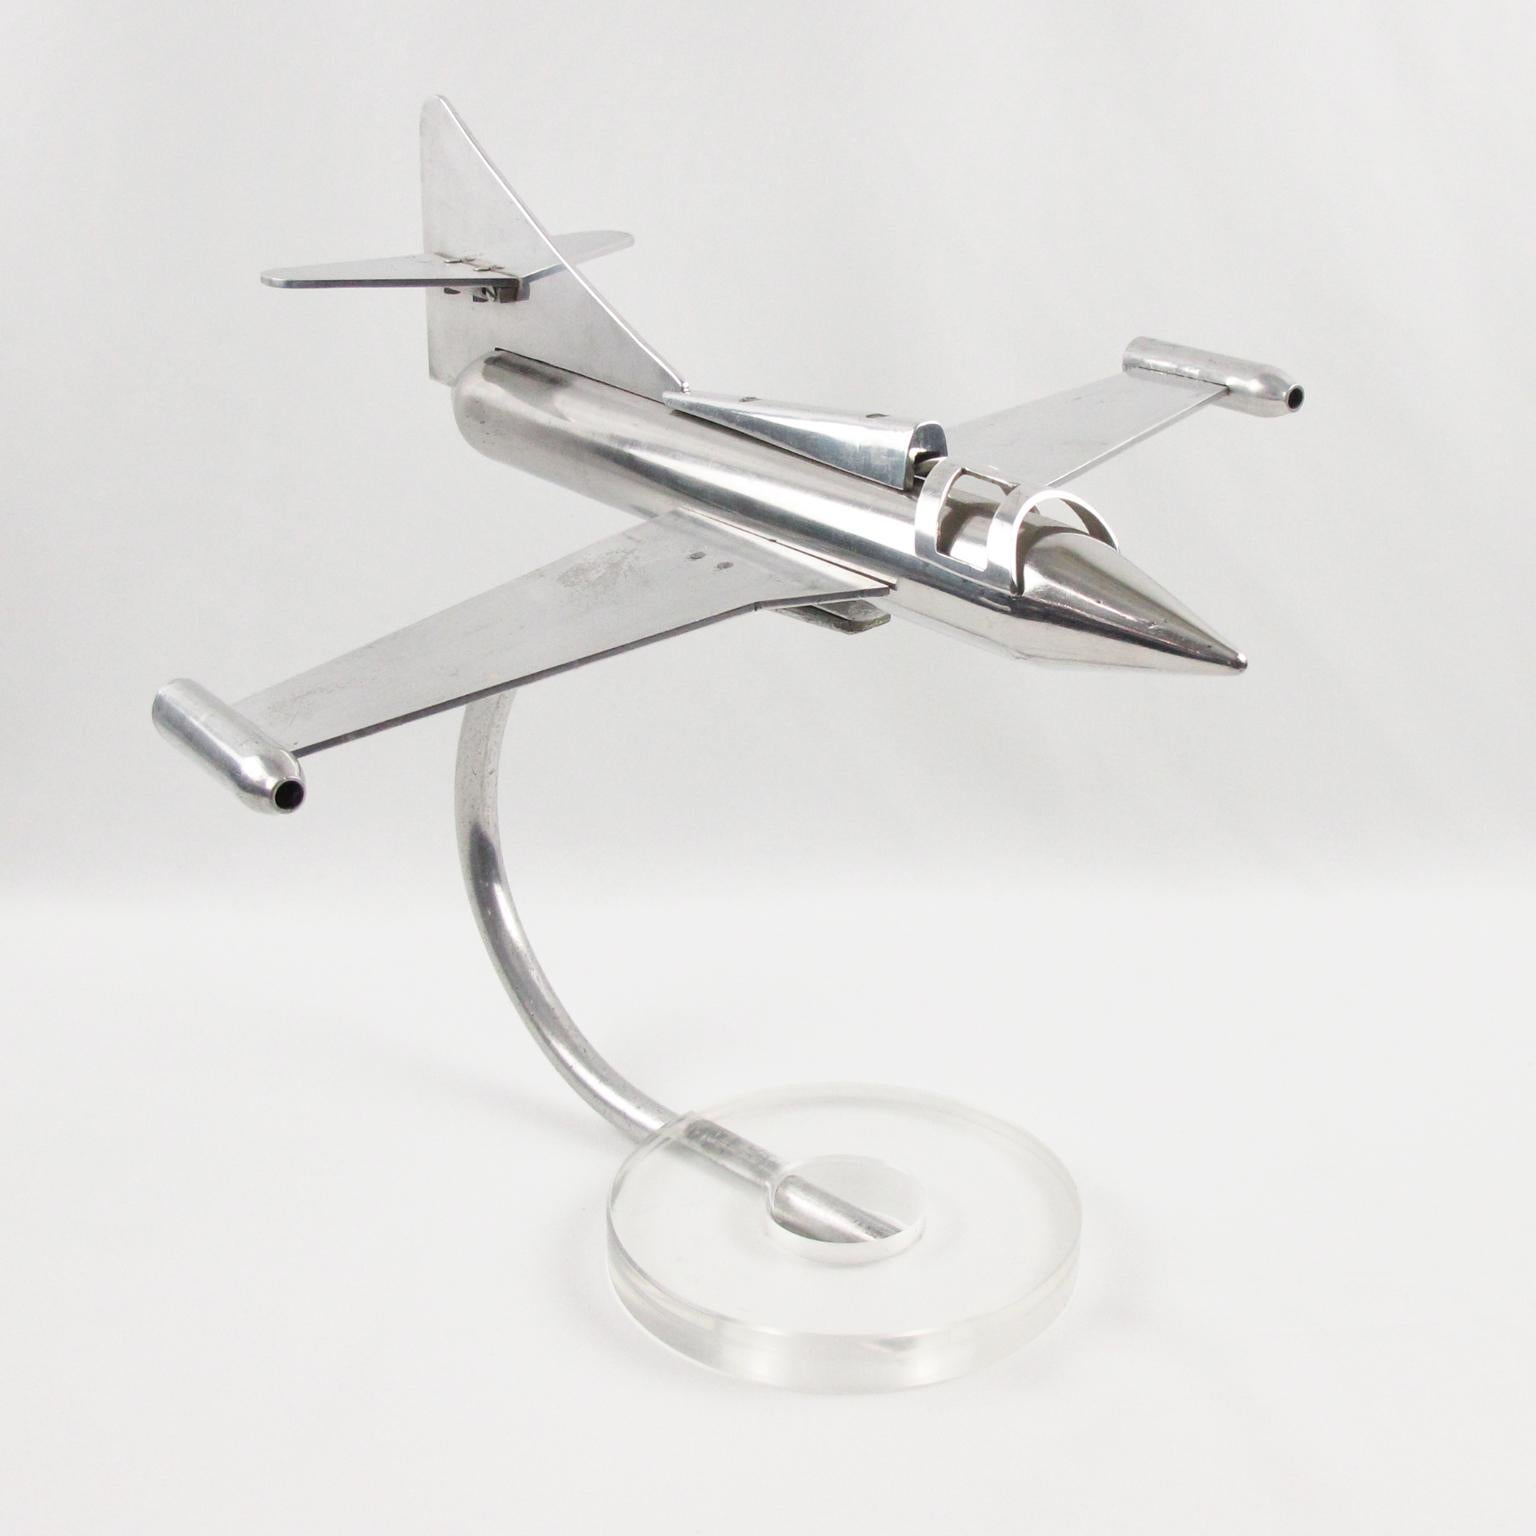 Stunning large polished aluminum airplane model, made in France, circa 1970s. Featuring an impressive jet plane model on thick clear Lucite slab base. Great desk accessory for aviation collector and lover. 
Measurements: 15.75 in. wingspan (40 cm)